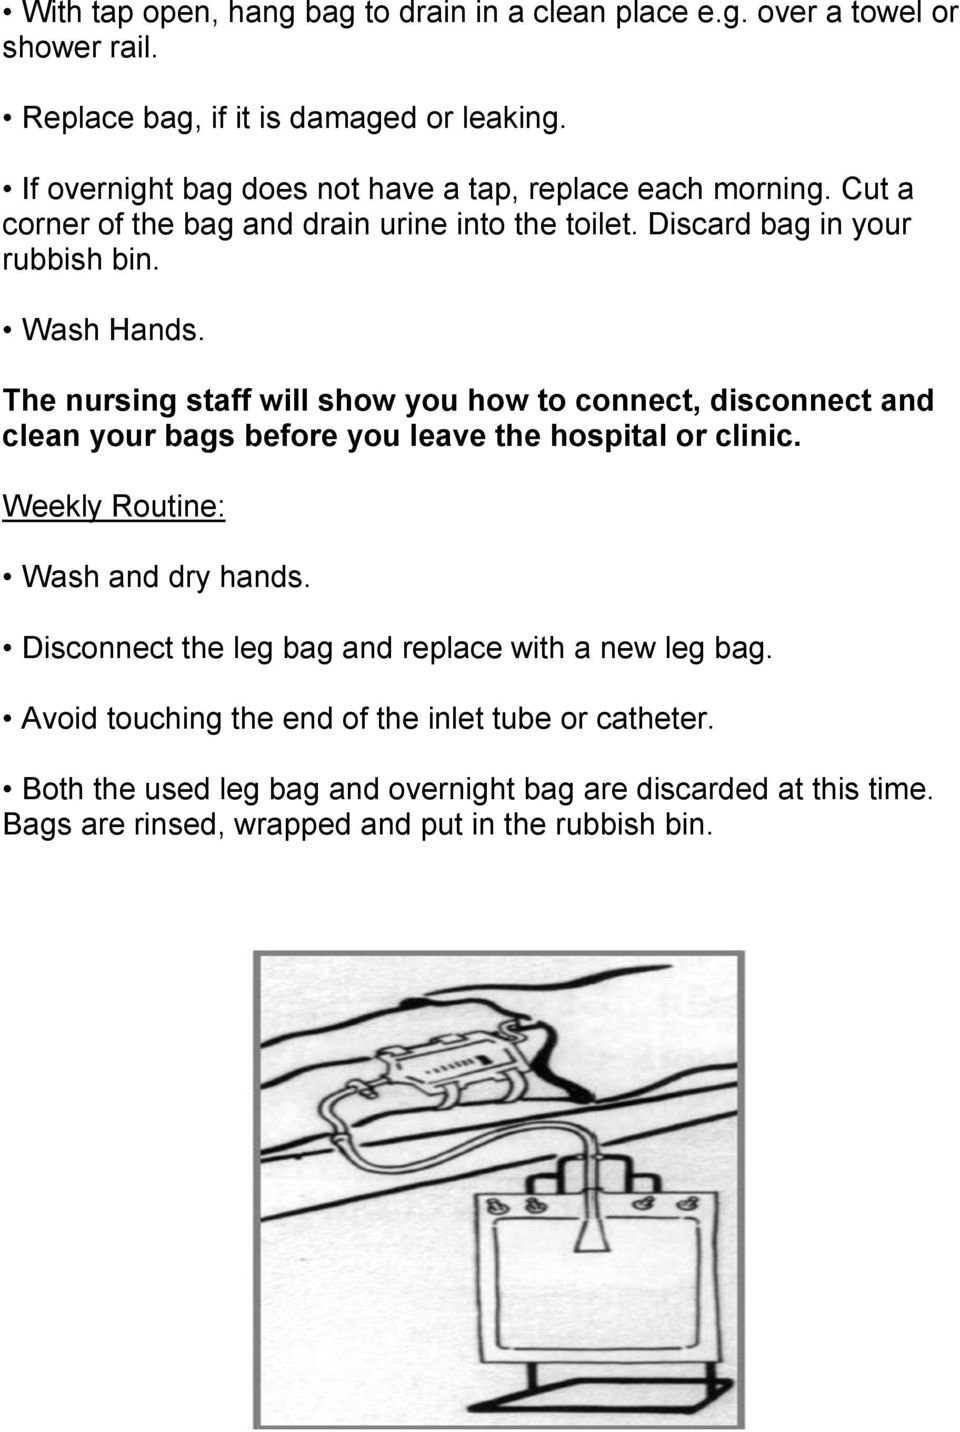 The nursing staff will show you how to connect, disconnect and clean your bags before you leave the hospital or clinic. Weekly Routine: Wash and dry hands.